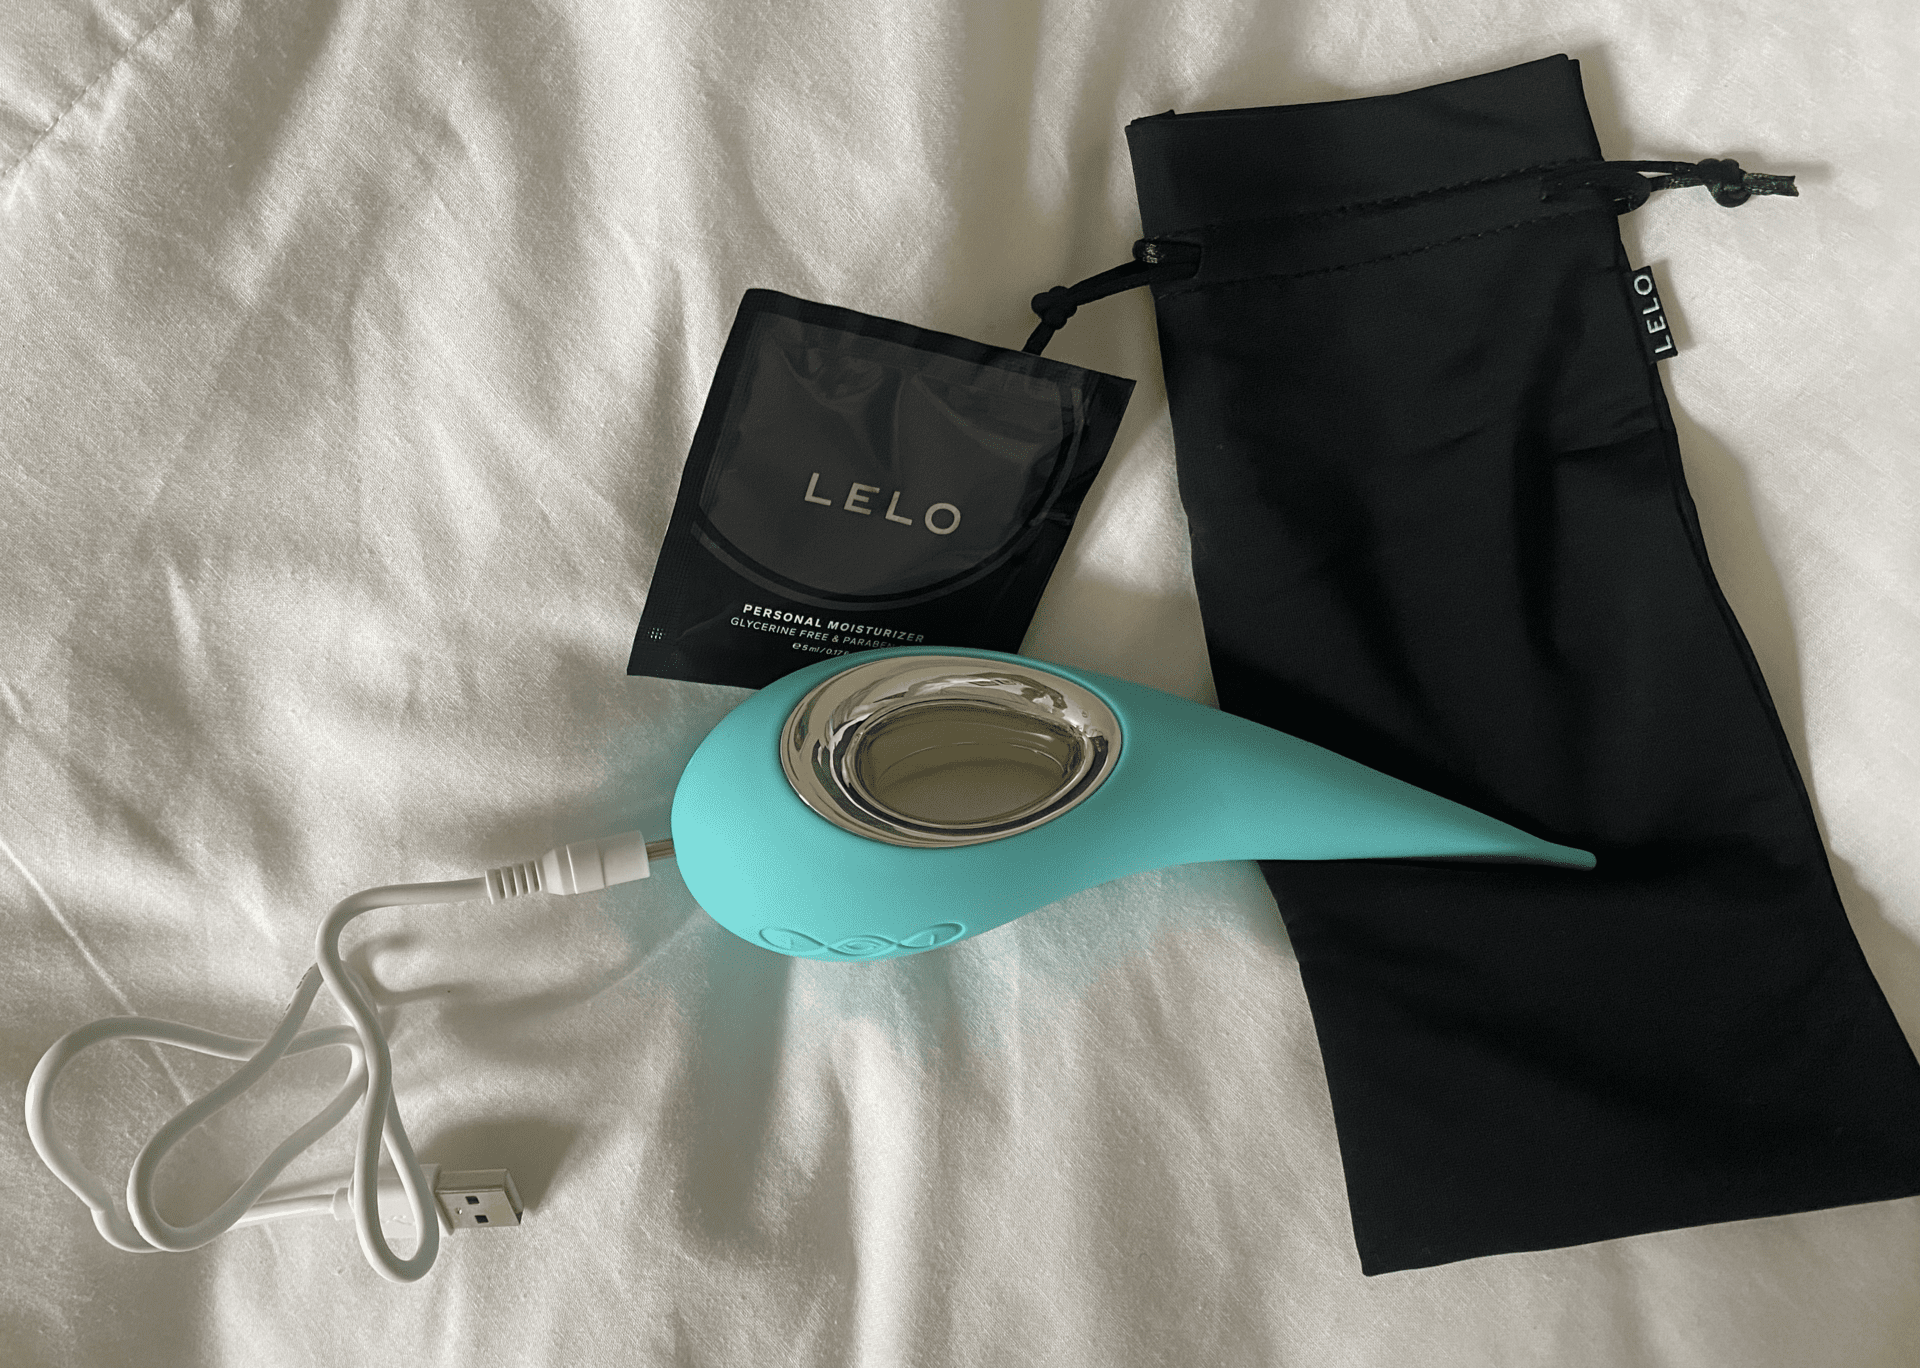 Lelo Dot Review In Use with Bag Lube